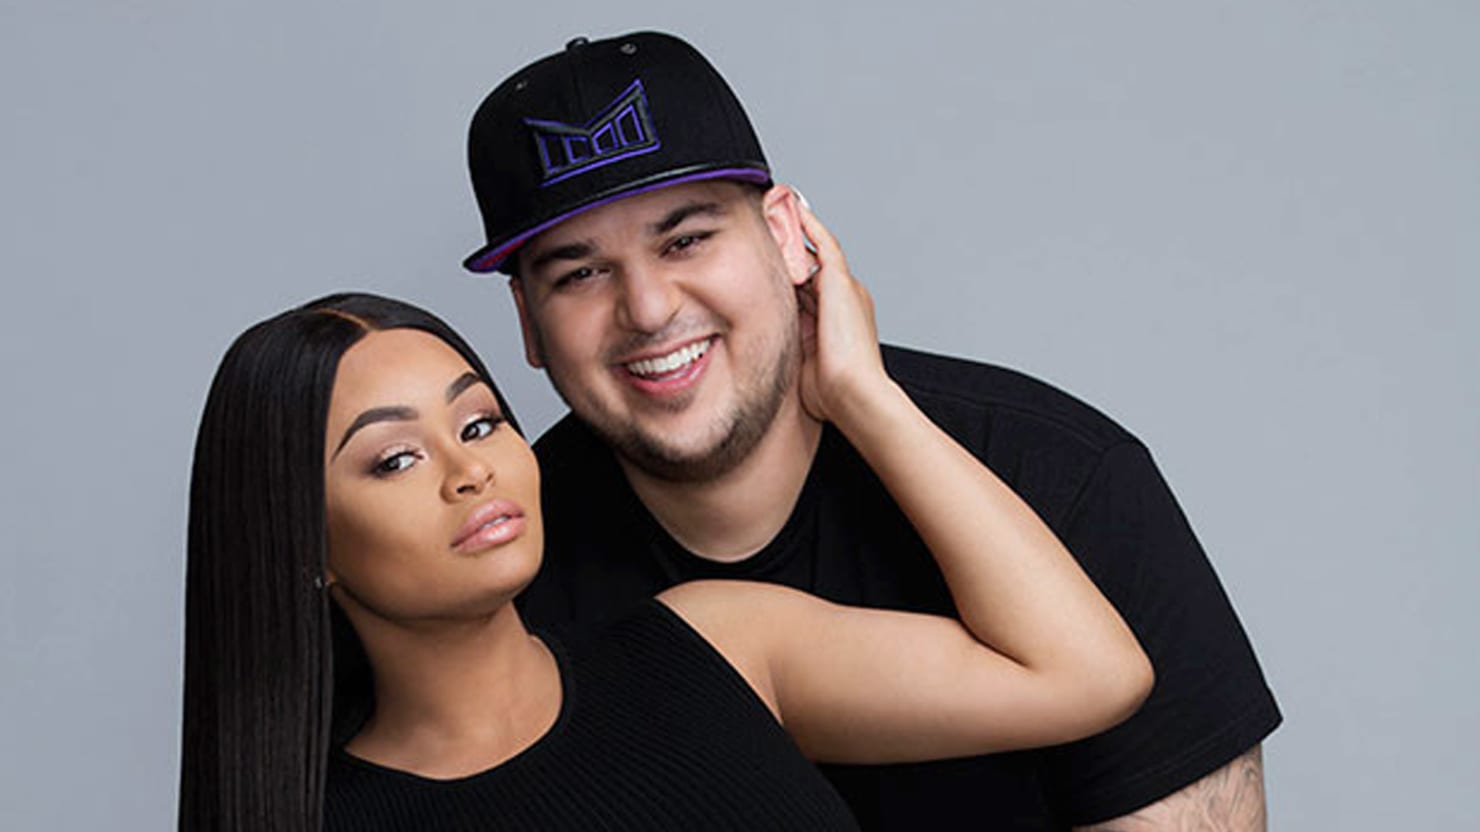 Rob and chyna started dating